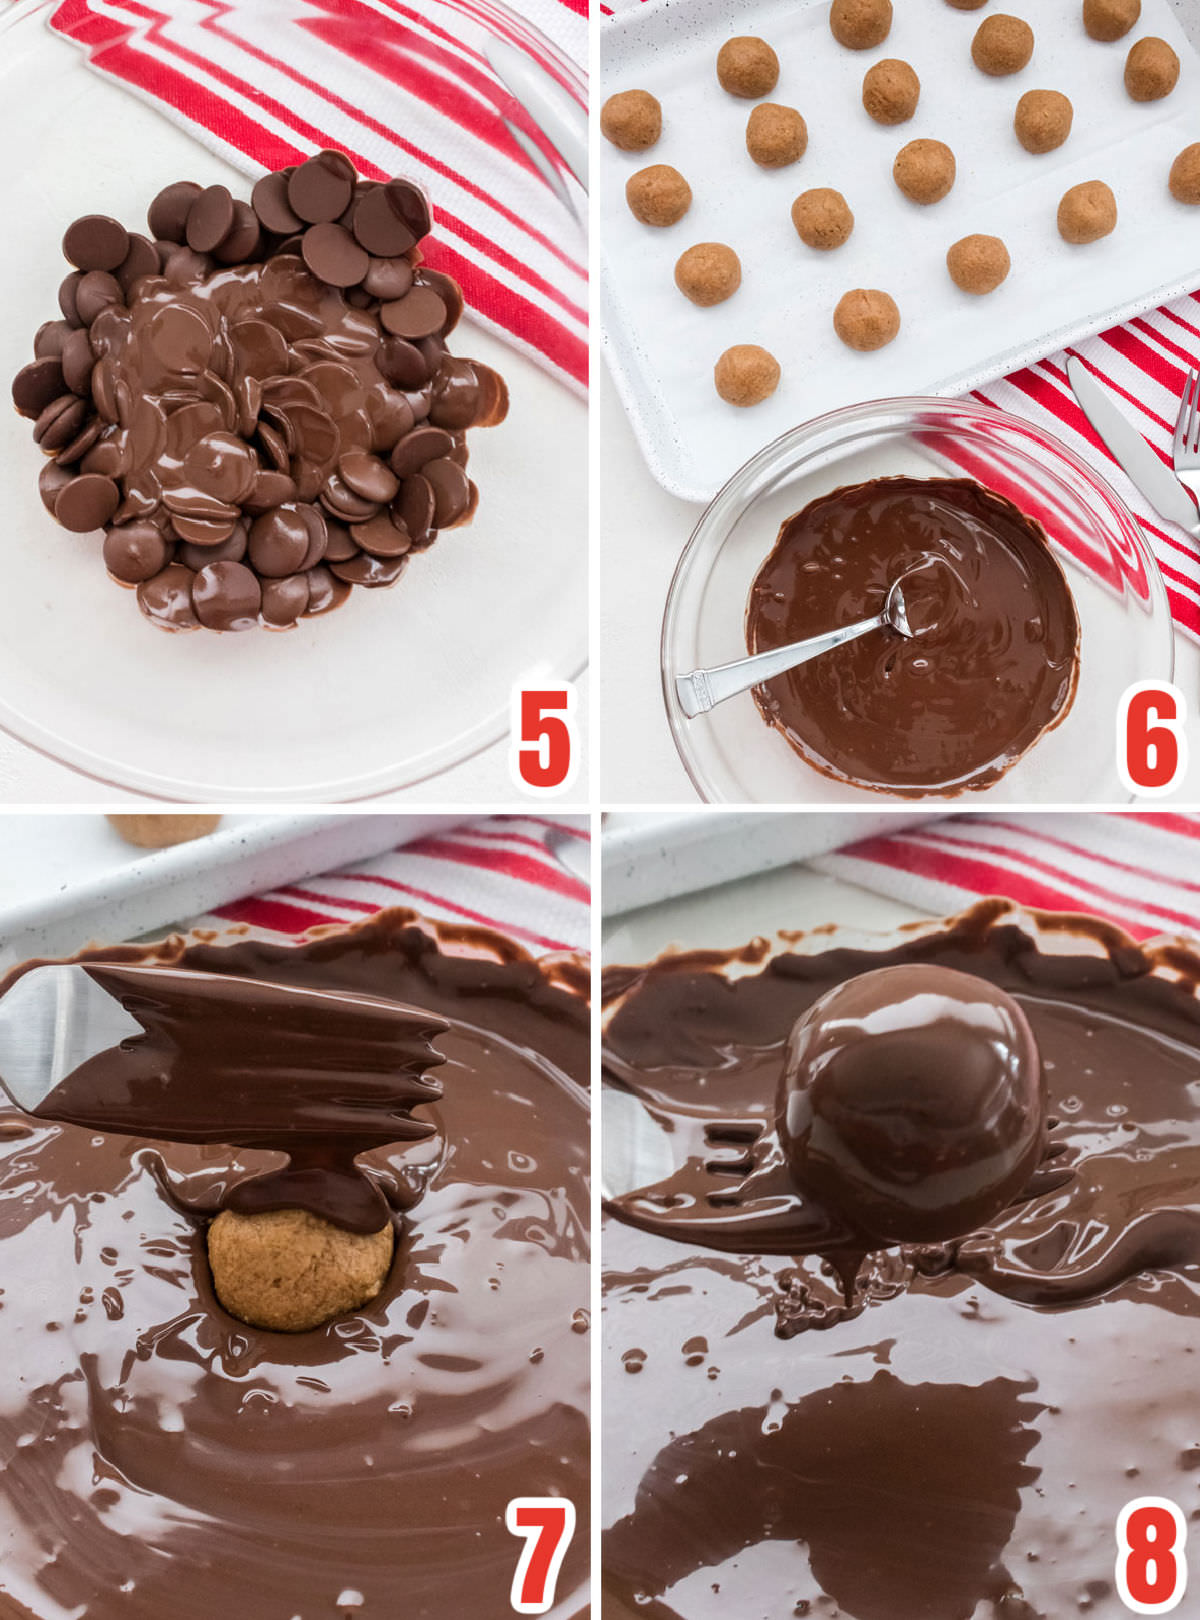 Collage images showing the steps for dipping the peanut butter balls into chocolate.